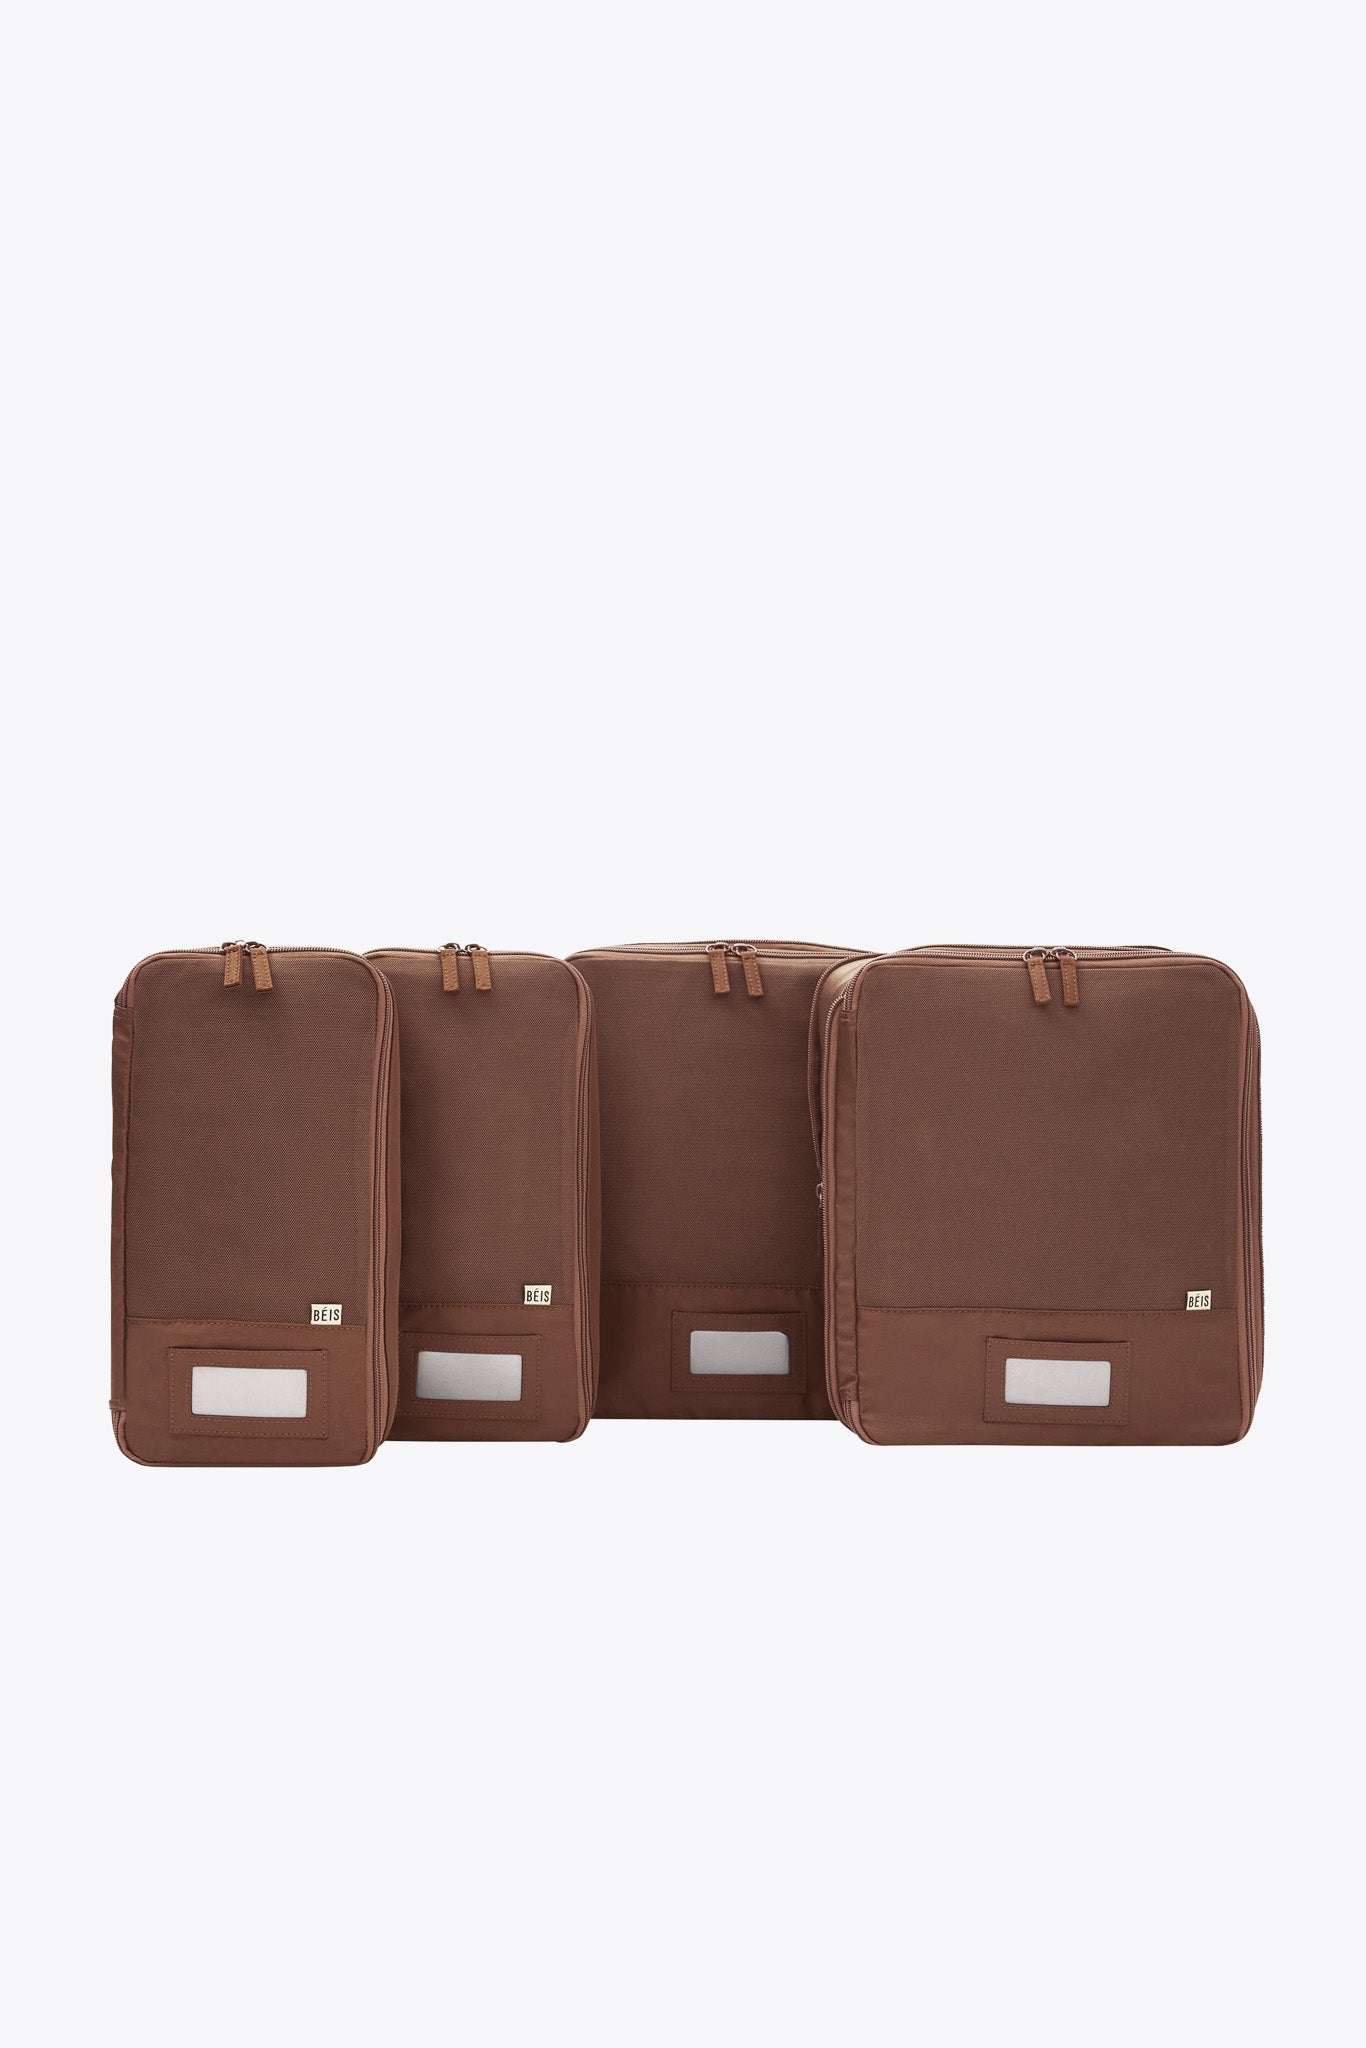 BÉIS 'The Compression Packing Cube Set' in Maple - Brown 4-Piece Set Of Packing Cubes For Carry-On Bag